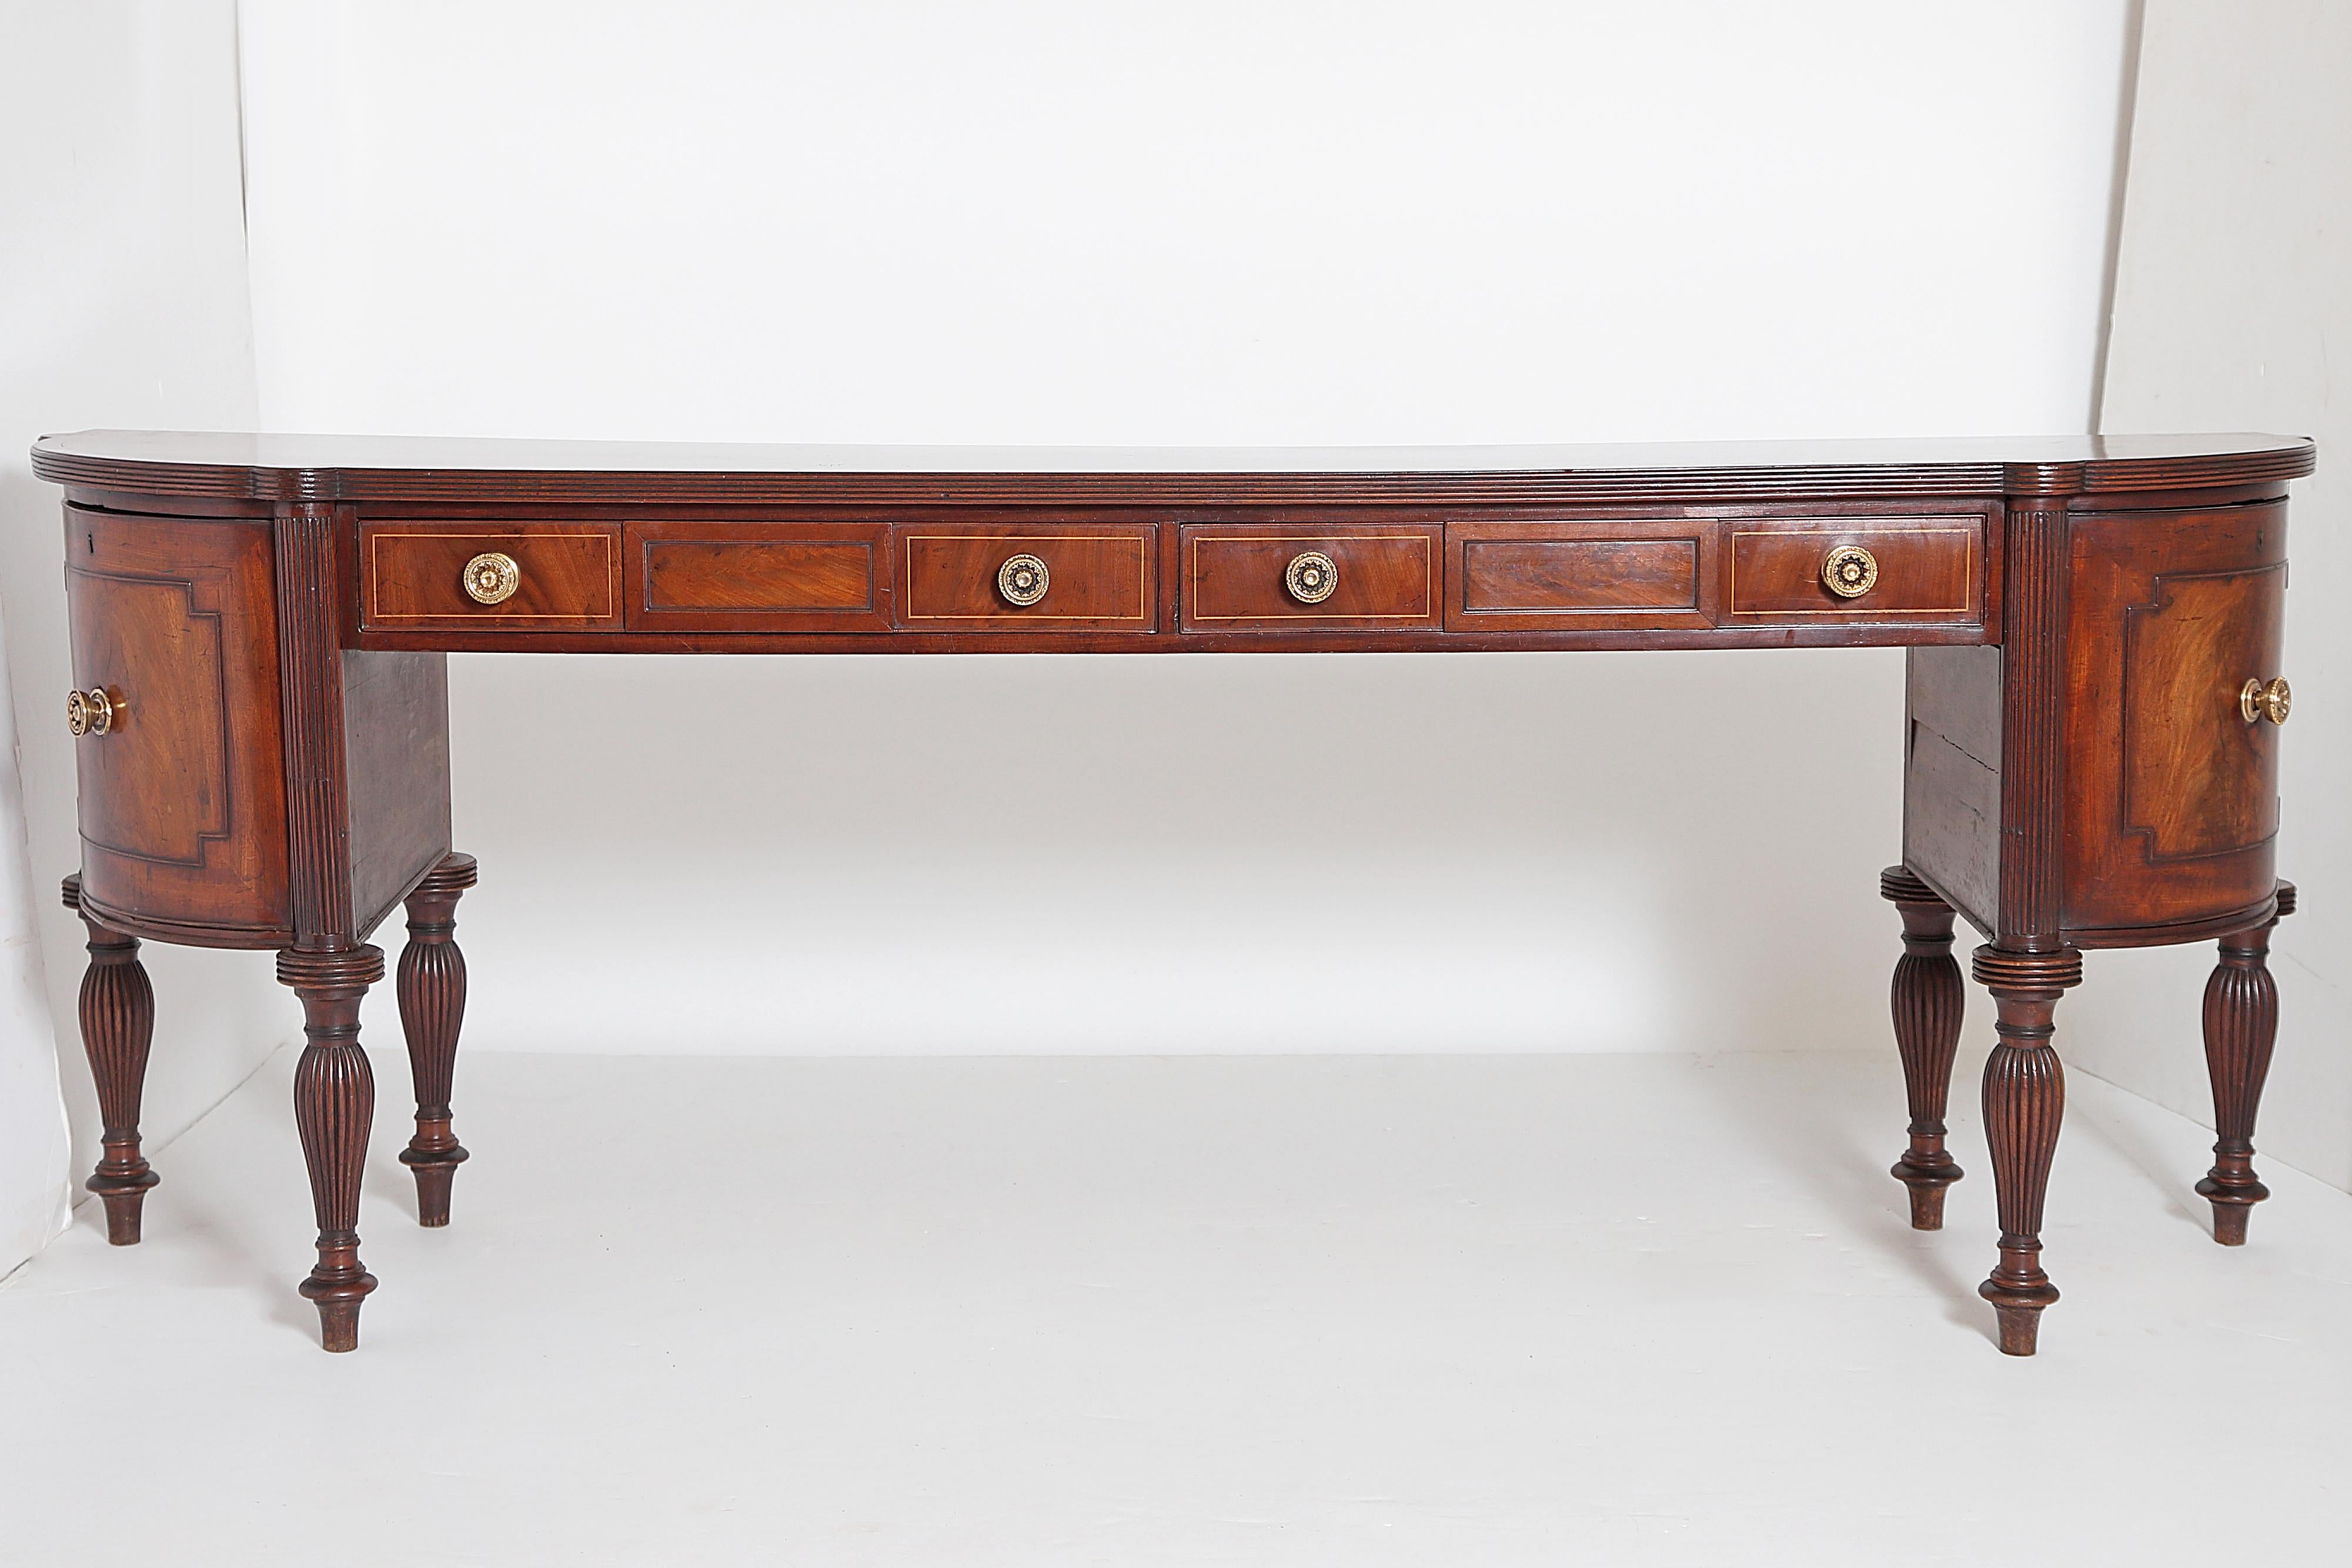 A circa 1810 English Regency sideboard of beautiful figured mahogany with two (2) long central drawers flanked by hinged (they swing out, see images) lead lined cellerets each partitioned for six (6) bottles, single board top with inlaid stringing,